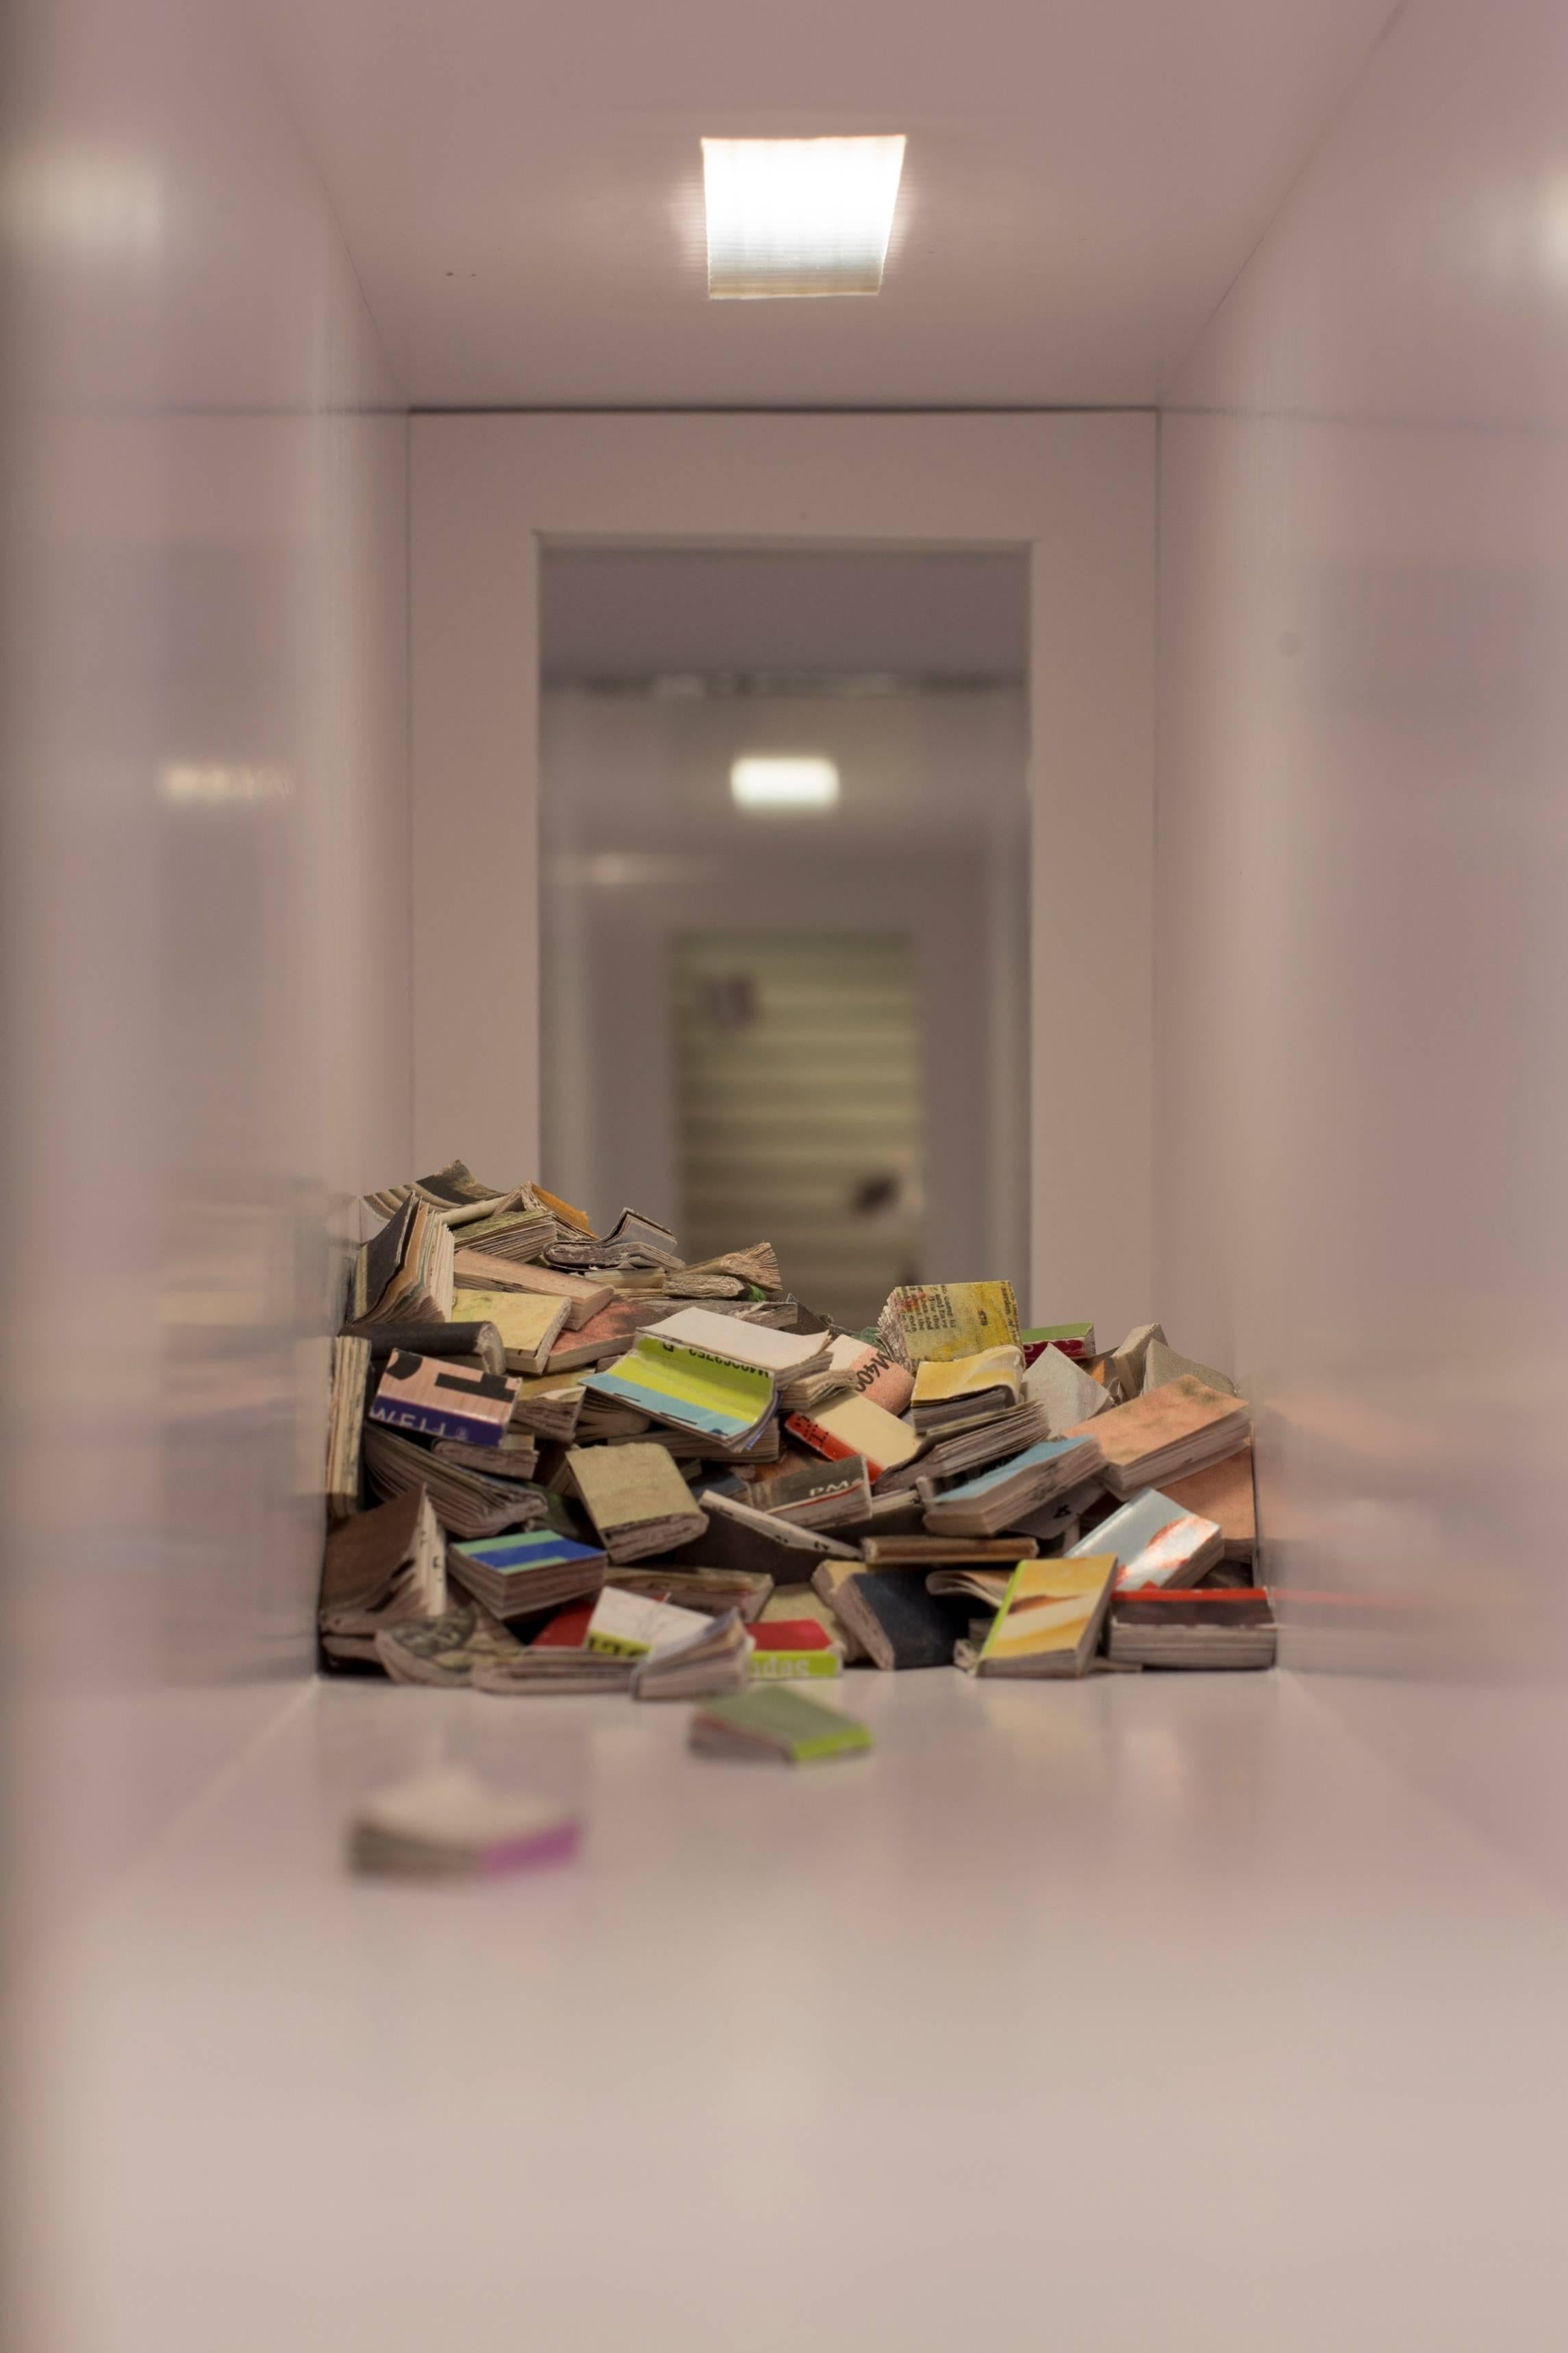 Untitled (Floating Books) - Sculpture by Erika Dueck